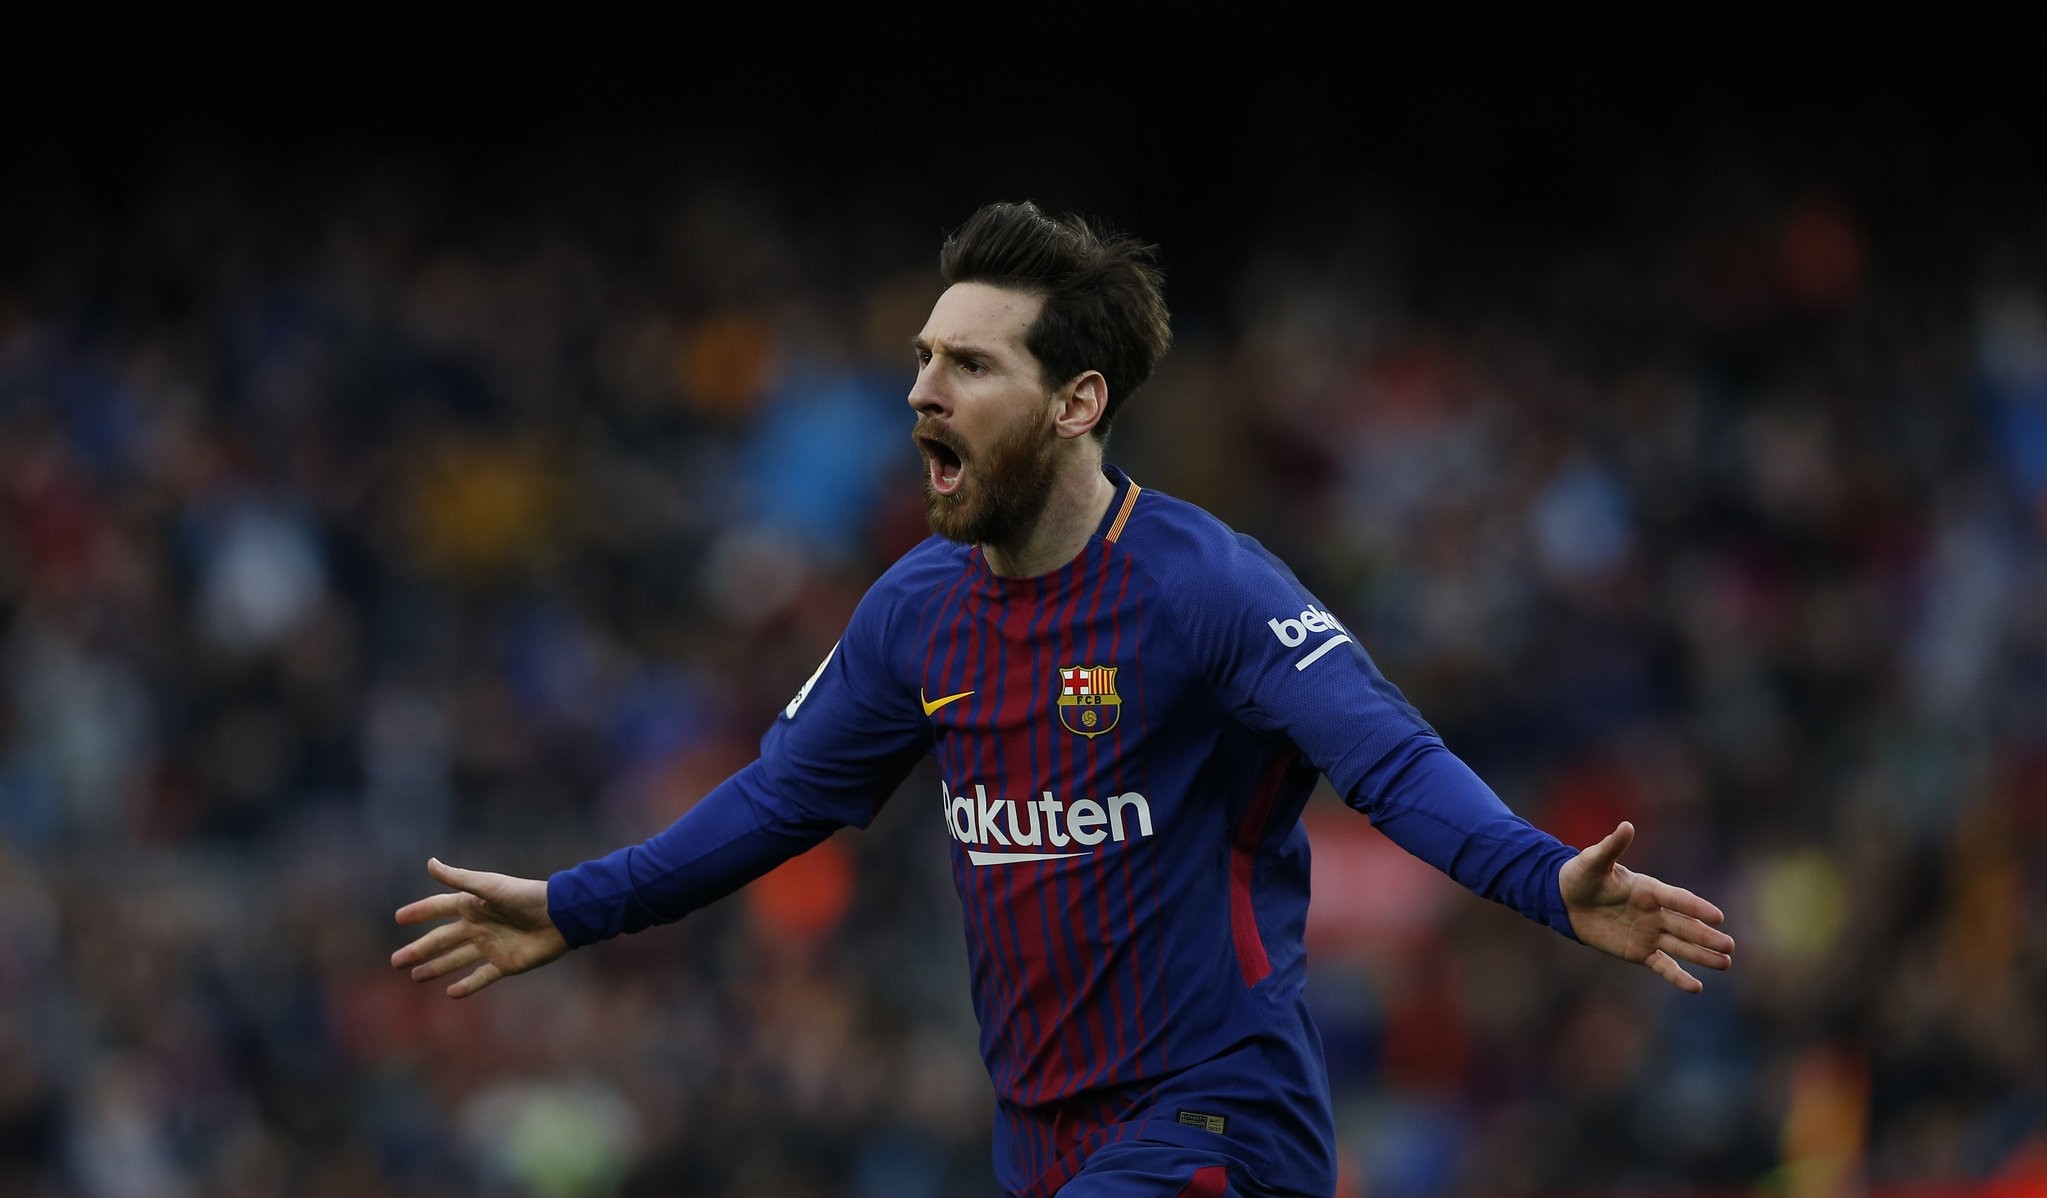 FC Barcelona's Lionel Messi reacts after scoring during the Spanish La Liga soccer match between FC Barcelona and Atletico Madrid at the Camp Nou stadium in Barcelona, Spain, Sunday, March 4, 2018. (AP Photo)